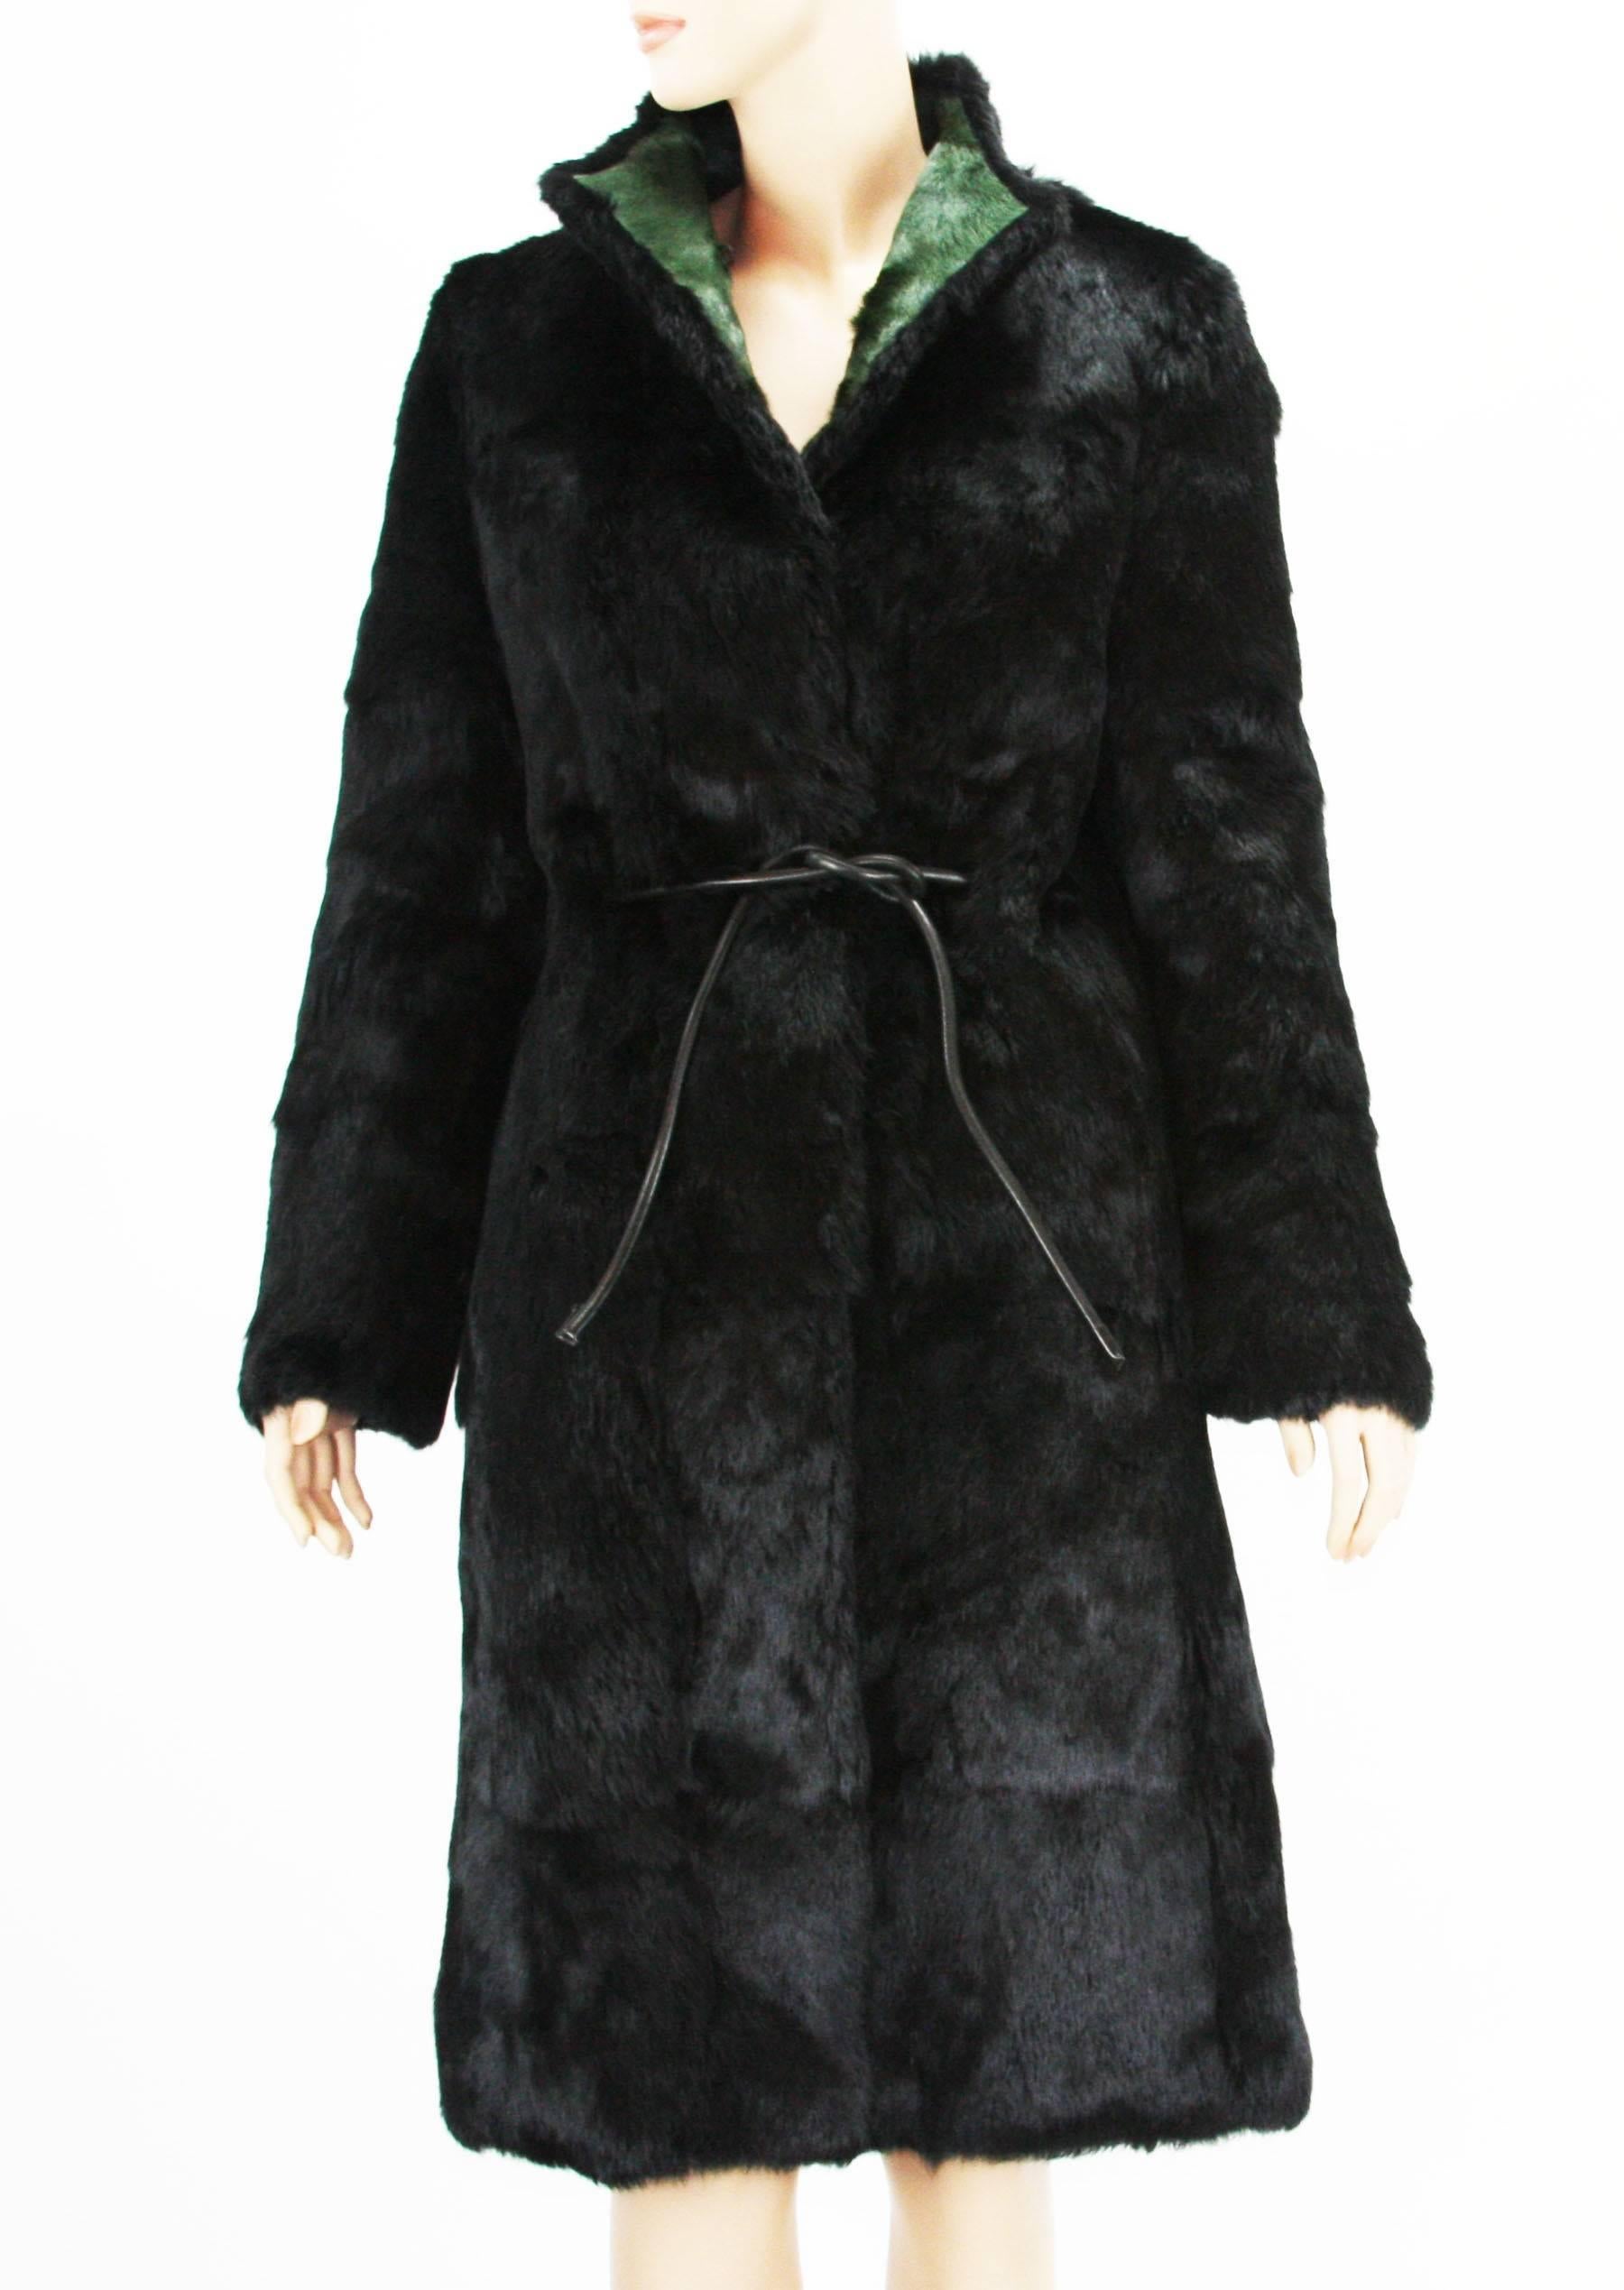 Tom Ford for Gucci 1999 Collection Reversible Emerald Green Fur Coat It. 40 For Sale 5